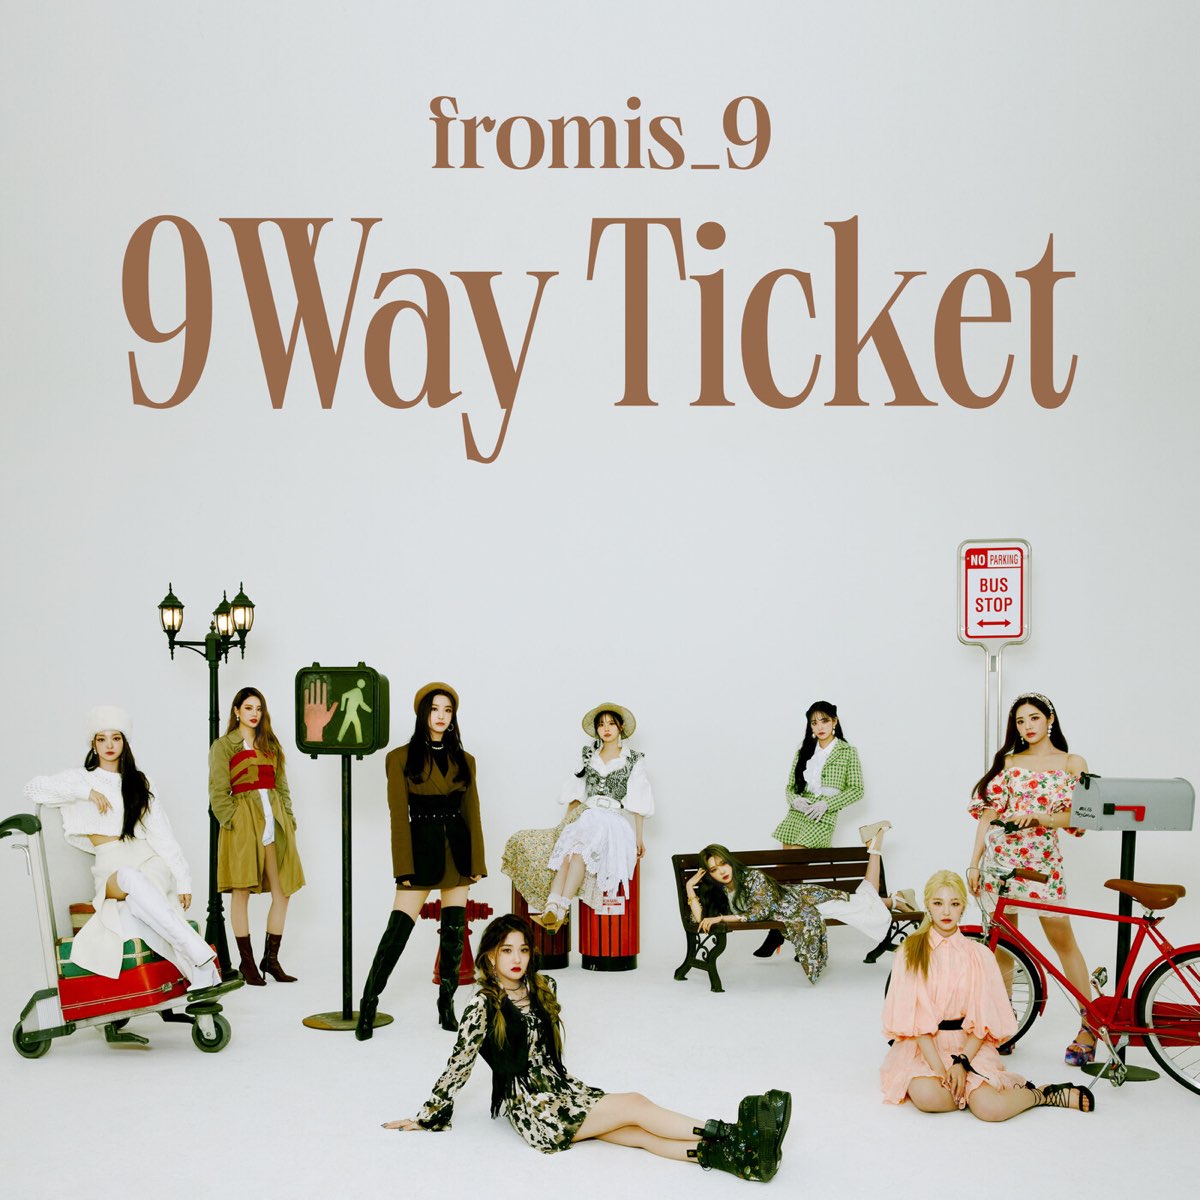 ‎9 WAY TICKET - Single by fromis_9 on Apple Music